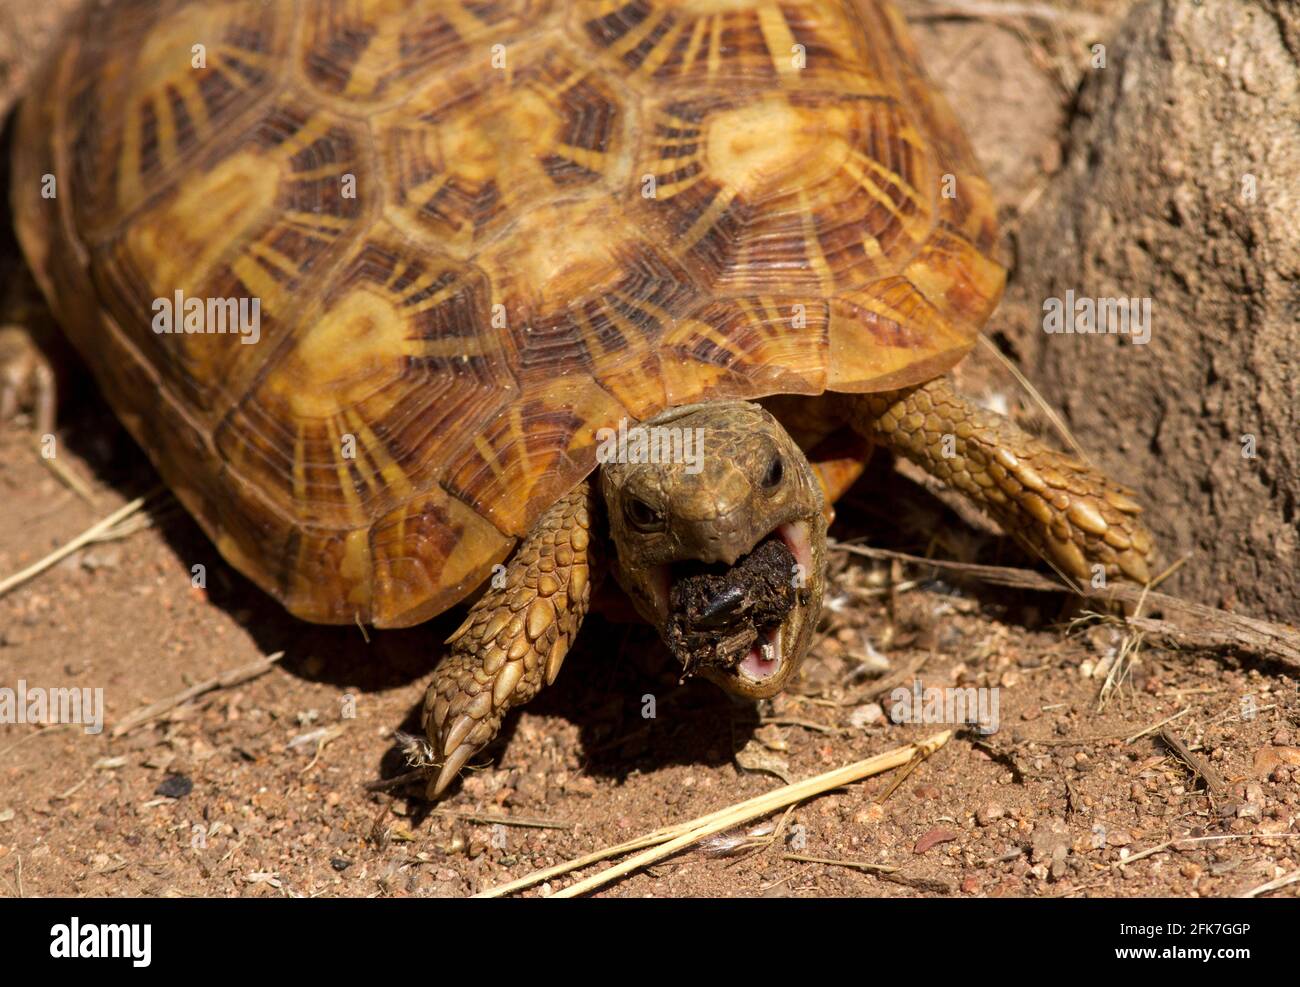 The Pancake Tortoise is endemic to central East Africa and threatened by illegal collection for the pet trade. This one is eating genet droppings Stock Photo